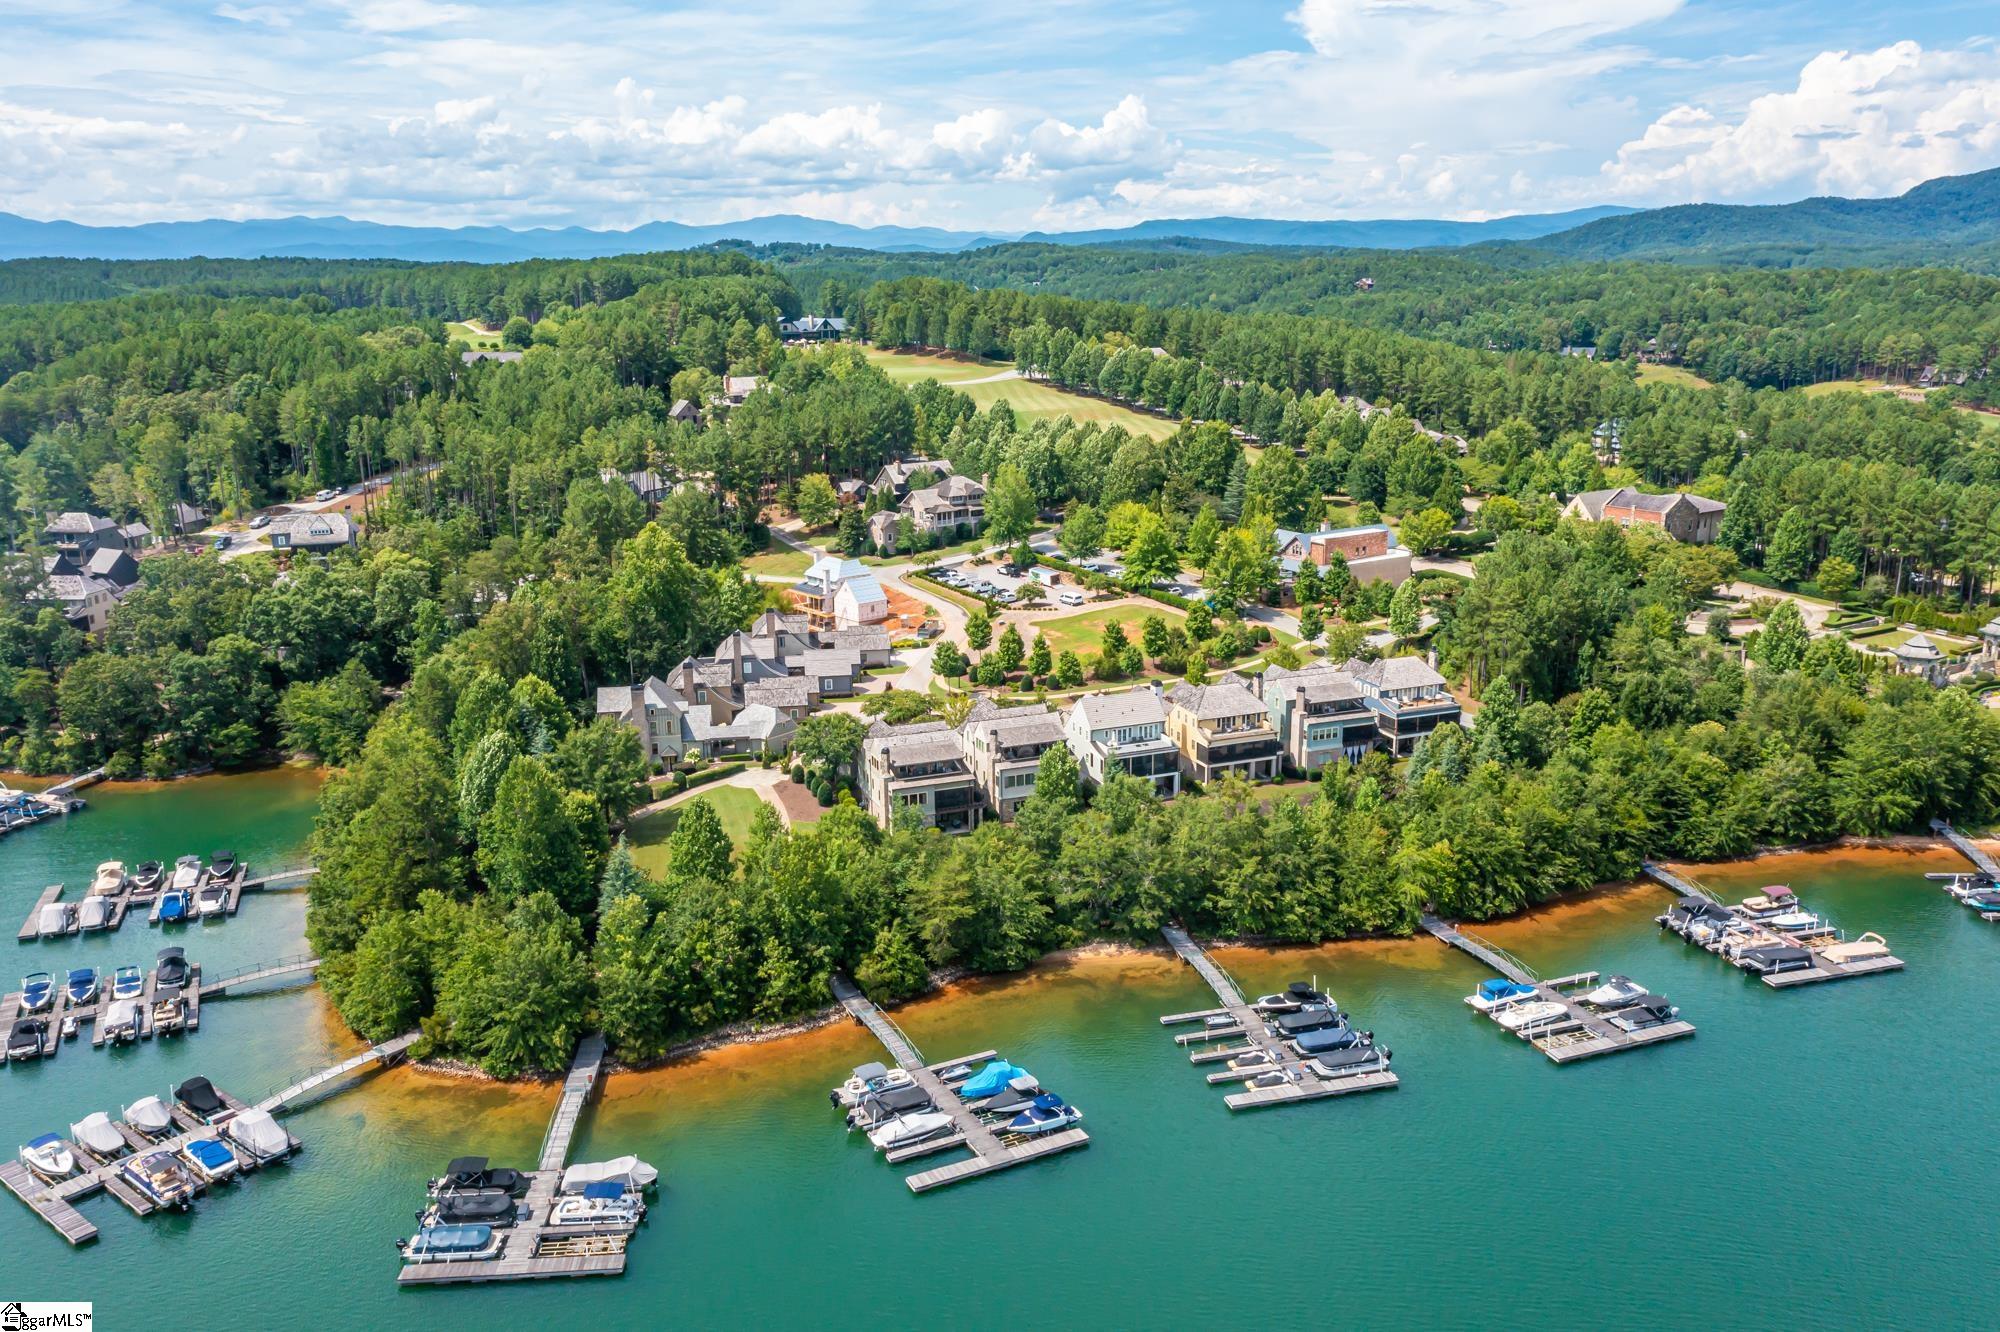 Lake Keowee and the Blue Ridge Mountains offer a serene backdrop for this outstanding home built in 2013 by Pyramid Construction. Featuring five bedrooms and five and a half baths, it was thoughtfully designed by acclaimed architect Lew Oliver and decorated by Fowler Interiors. The exterior is striking but subtle, matching the character of its natural surroundings.     Not that you’d ever grow tired of the view, but 135 Village Point Drive has distinctive outdoor spaces on three different levels—each one large enough for entertaining but comfortable and intimate. The front and lower porch are appointed with bluestone floors, and the ground level has a built-in kitchen ready for your housewarming celebration.   Just steps away from the marina, the lake, and the pools, the location and the view are more than enough to make this property memorable, but the interior is also extraordinary. You’ll enjoy ambient light, ample room, and open space in this expansive home, but you’ll also find peaceful alcoves on each floor. Cozy up to the stone fireplace or have a seat by the prominent kitchen island, which is bound to become a gathering spot as the family chef works. The kitchen has top-rated appliances including a two-door stainless steel refrigerator and a wine refrigerator.   There are den areas and wet bars on two levels. The master bedroom on the main floor opens to the screened in porch and the custom closets are more than big: You’ll have not only storage, but also a system of organization, and the bathrooms will provide the repose of a spa in the comfort of your own home. Other features include a laundry on main level, walk-in storage that includes a second washer/dryer in the basement, and Trex® decking.    The Reserve at Lake Keowee, with its world-class amenities, juxtaposes the feel of a luxury resort and a rustic retreat. Thirty miles of unspoiled shoreline distinguish this 3,900-acre private community, along with a 200-slip marina, a Jack Nicklaus Signature golf course, a tennis center, fitness facilities, Founders Hall, a market, post office, fine dining at the clubhouse, multiple pools, hiking trails, and the welcoming Great Lawn for outdoor events. The quiet, village-like atmosphere represents the essence of intelligent development and community, and the public spaces are meticulously maintained.  Facing south, this elegant and inviting property is the ideal location for family and friends: a retreat, and a home like no other. Schedule an appointment to experience it today, and you could have a remarkable view of this year’s Fourth of July fireworks.